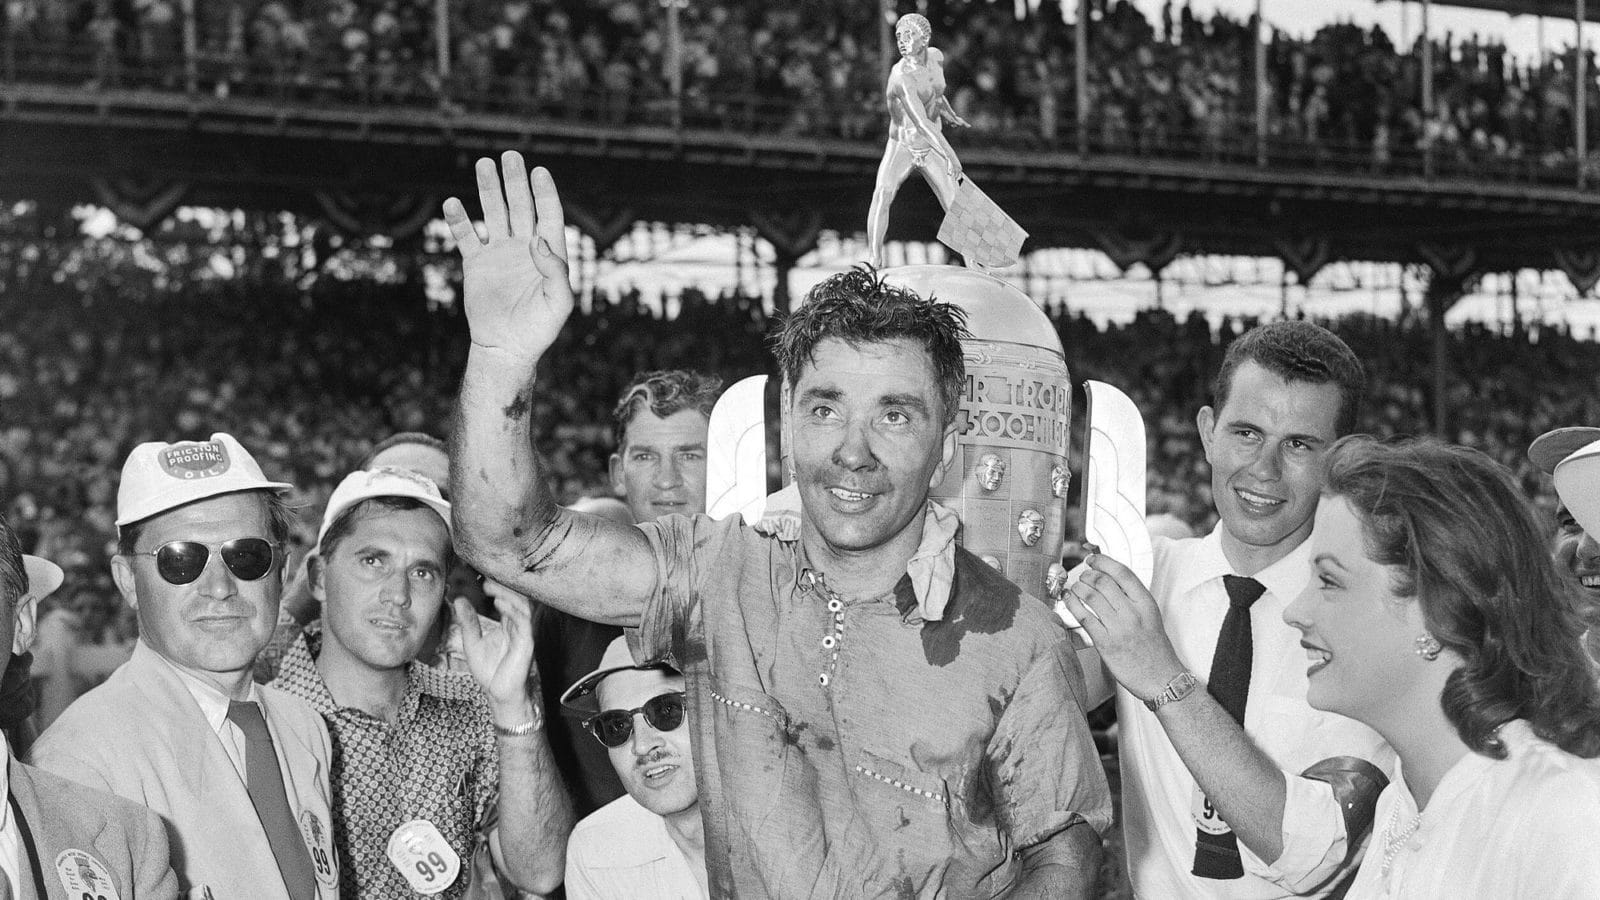 Bill Vukovich celebrates after winning the 1953 Indianapolis 500